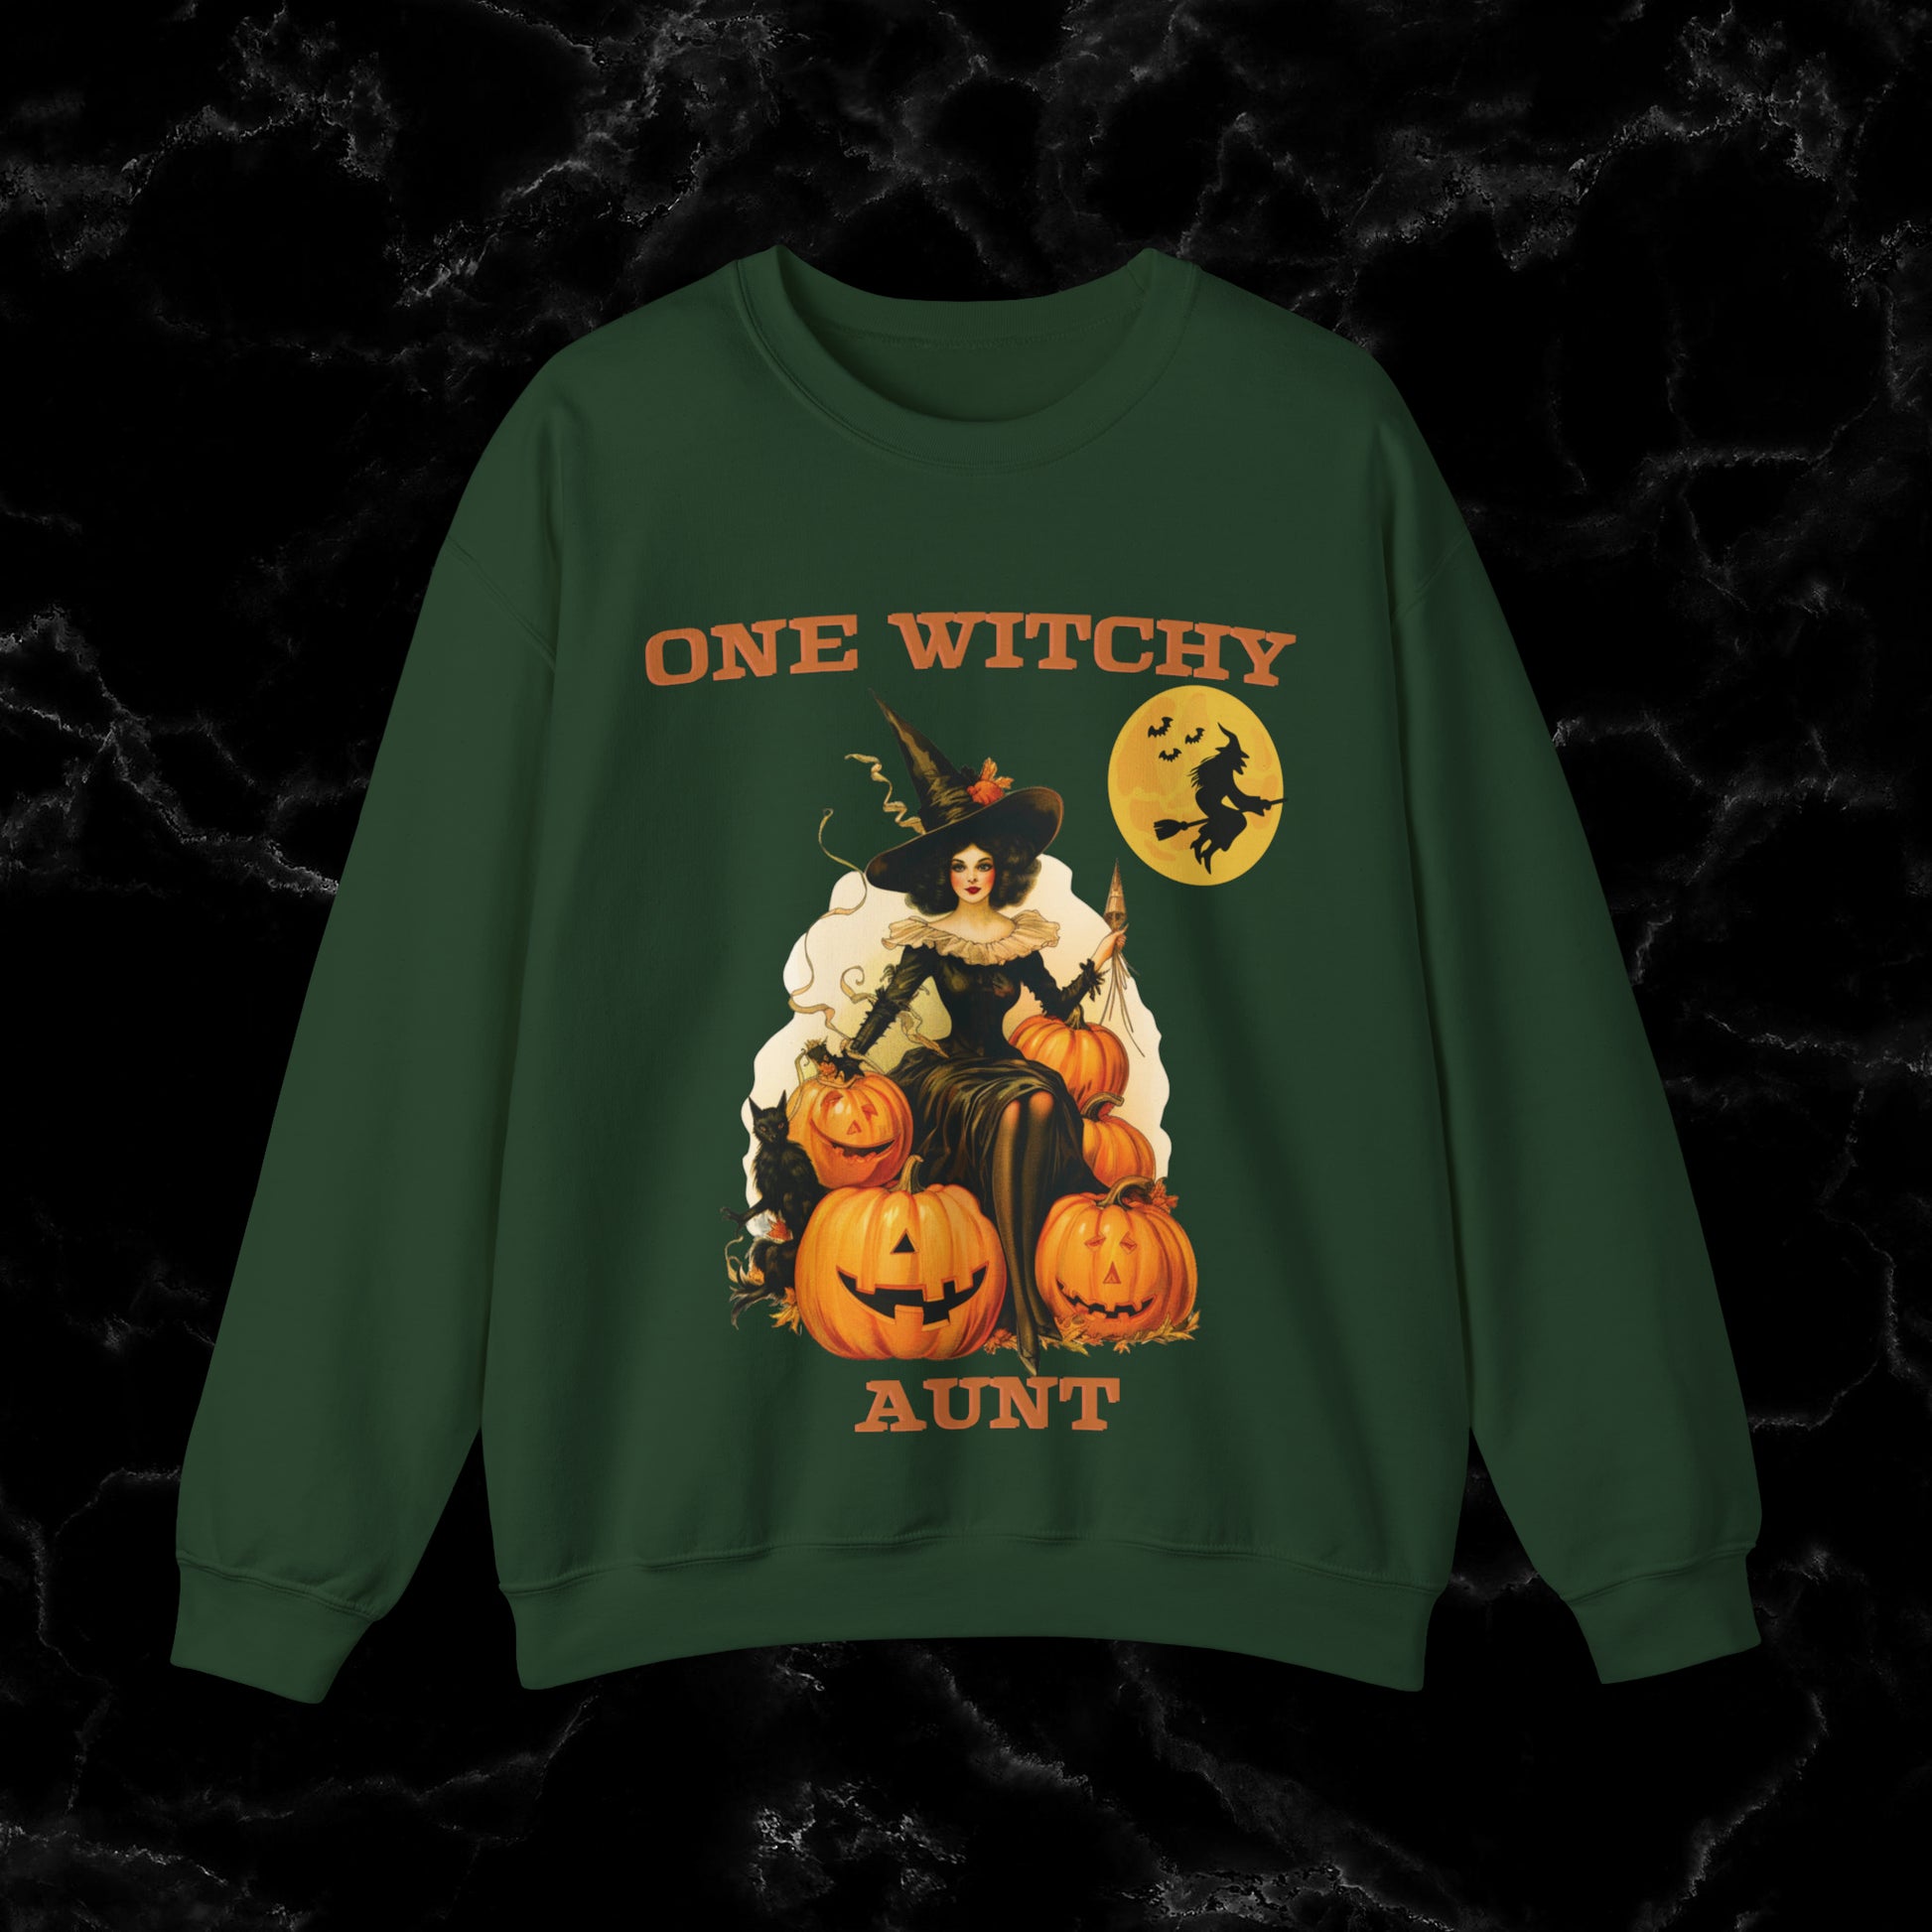 One Witchy Aunt Halloween Sweatshirt - Cool Aunt Shirt, Feral Aunt Sweatshirt, Perfect Gifts for Aunts Sweatshirt S Forest Green 